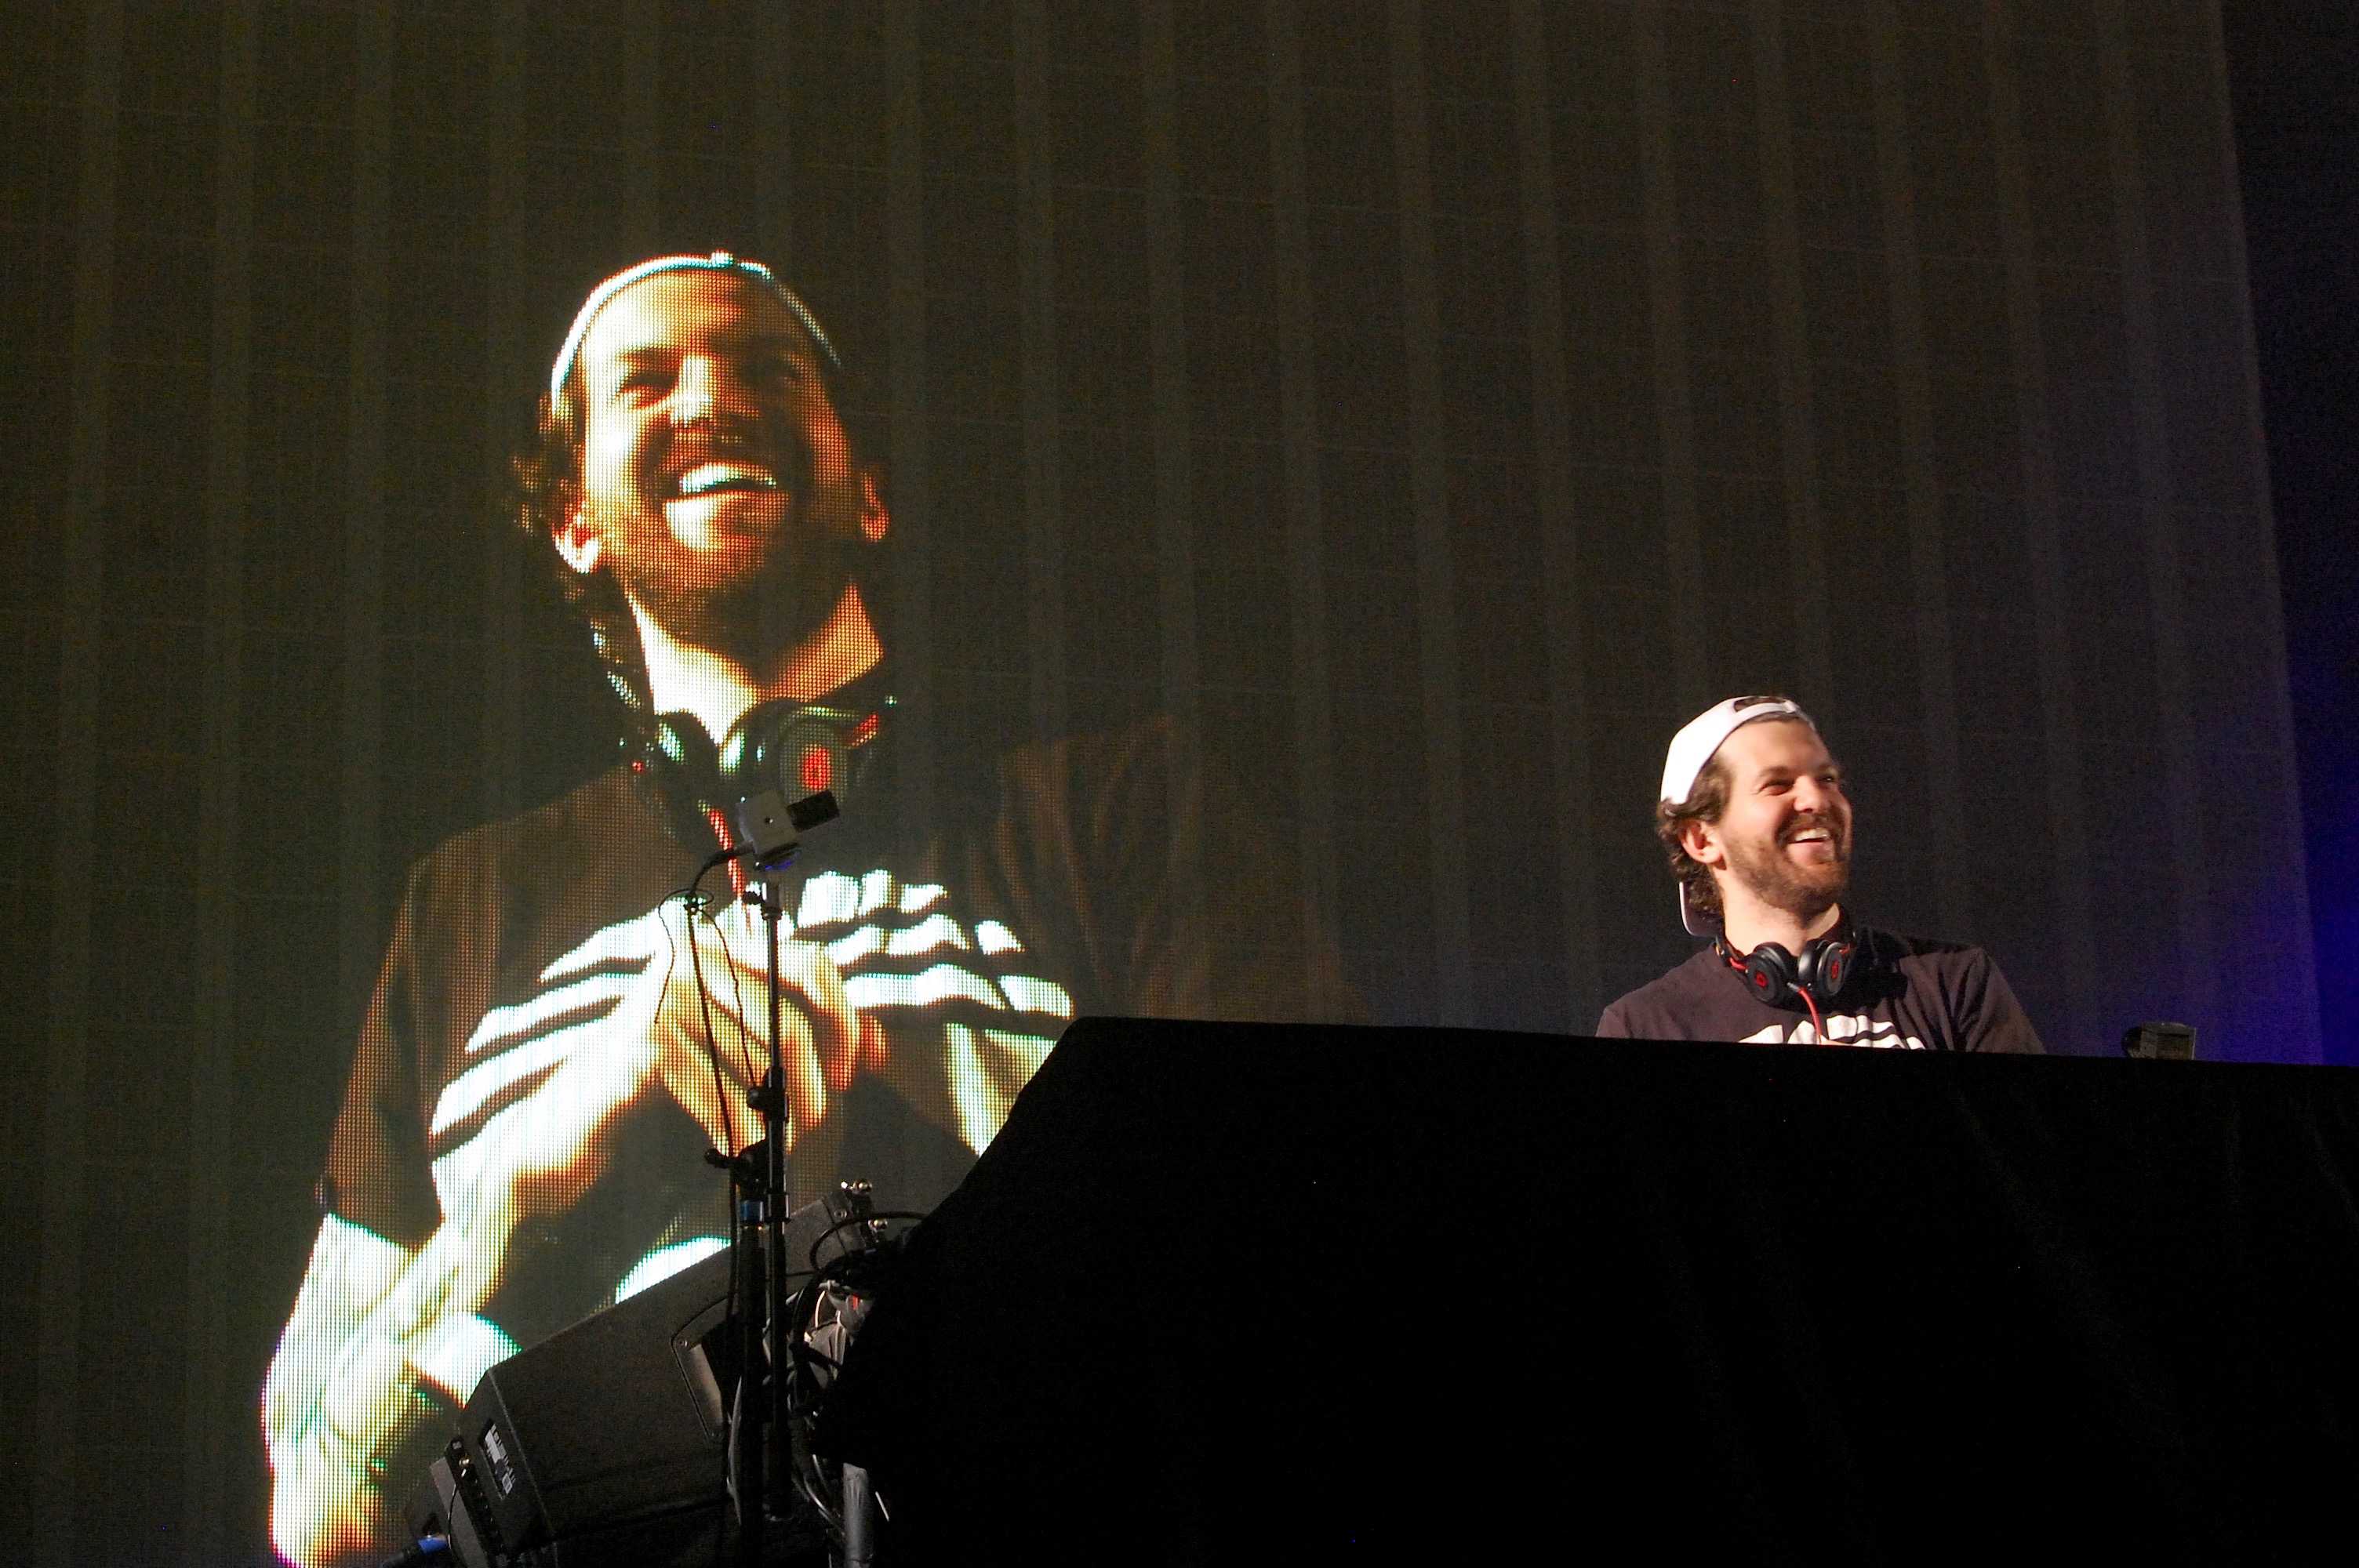 Dillon Francis played his fourth annual IDGAFOS Weekend concert series at the Shrine Auditorium and Expo Hall in Los Angeles on Dec. 18, 2015.